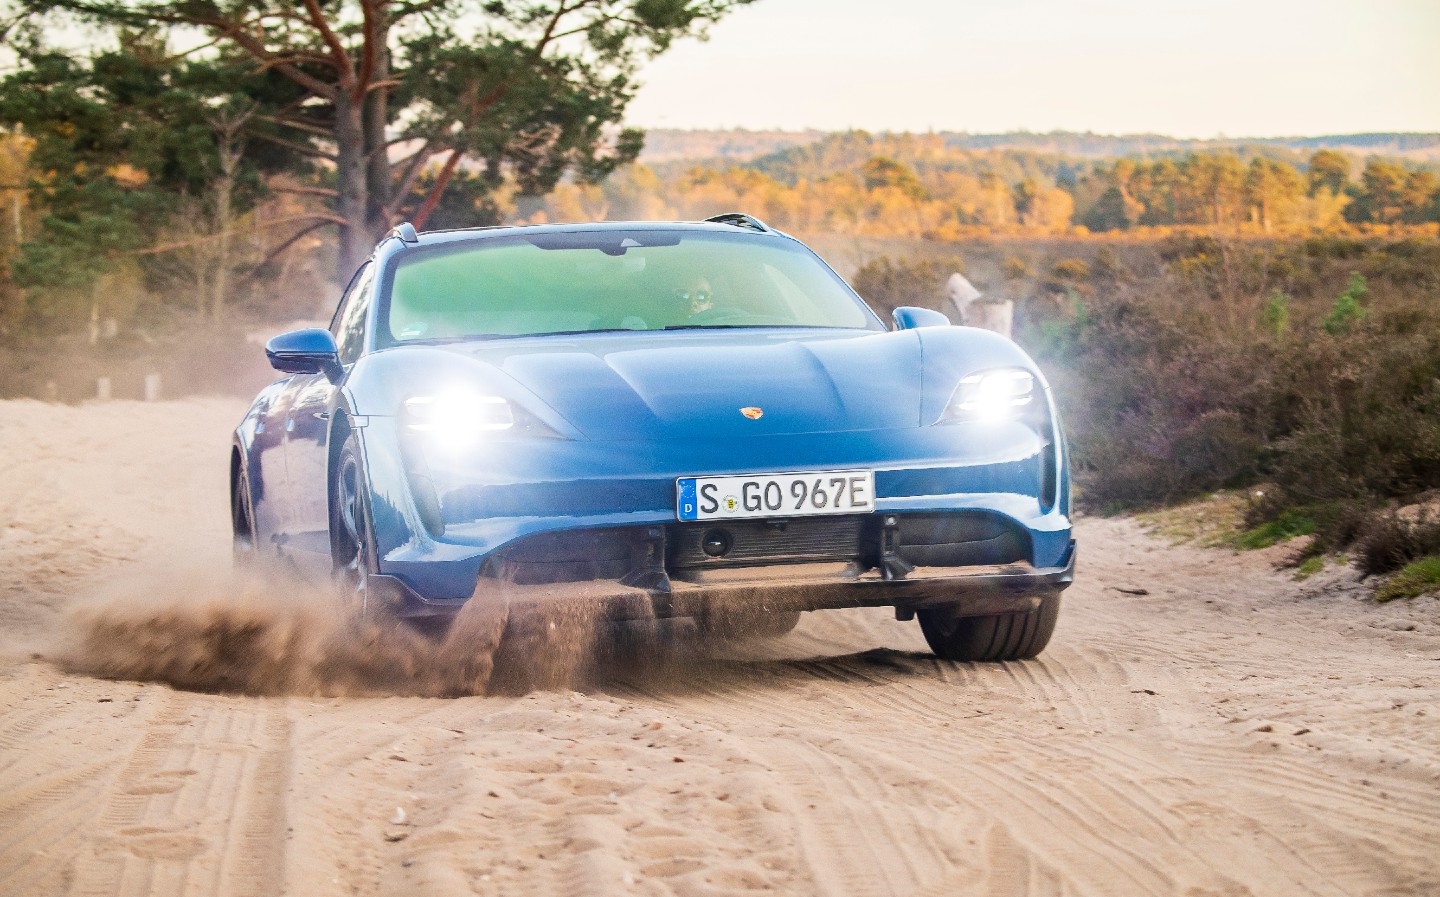 Porsche Taycan Turbo S Cross Turismo review by Will Dron for Sunday Times Driving.co.uk off-road